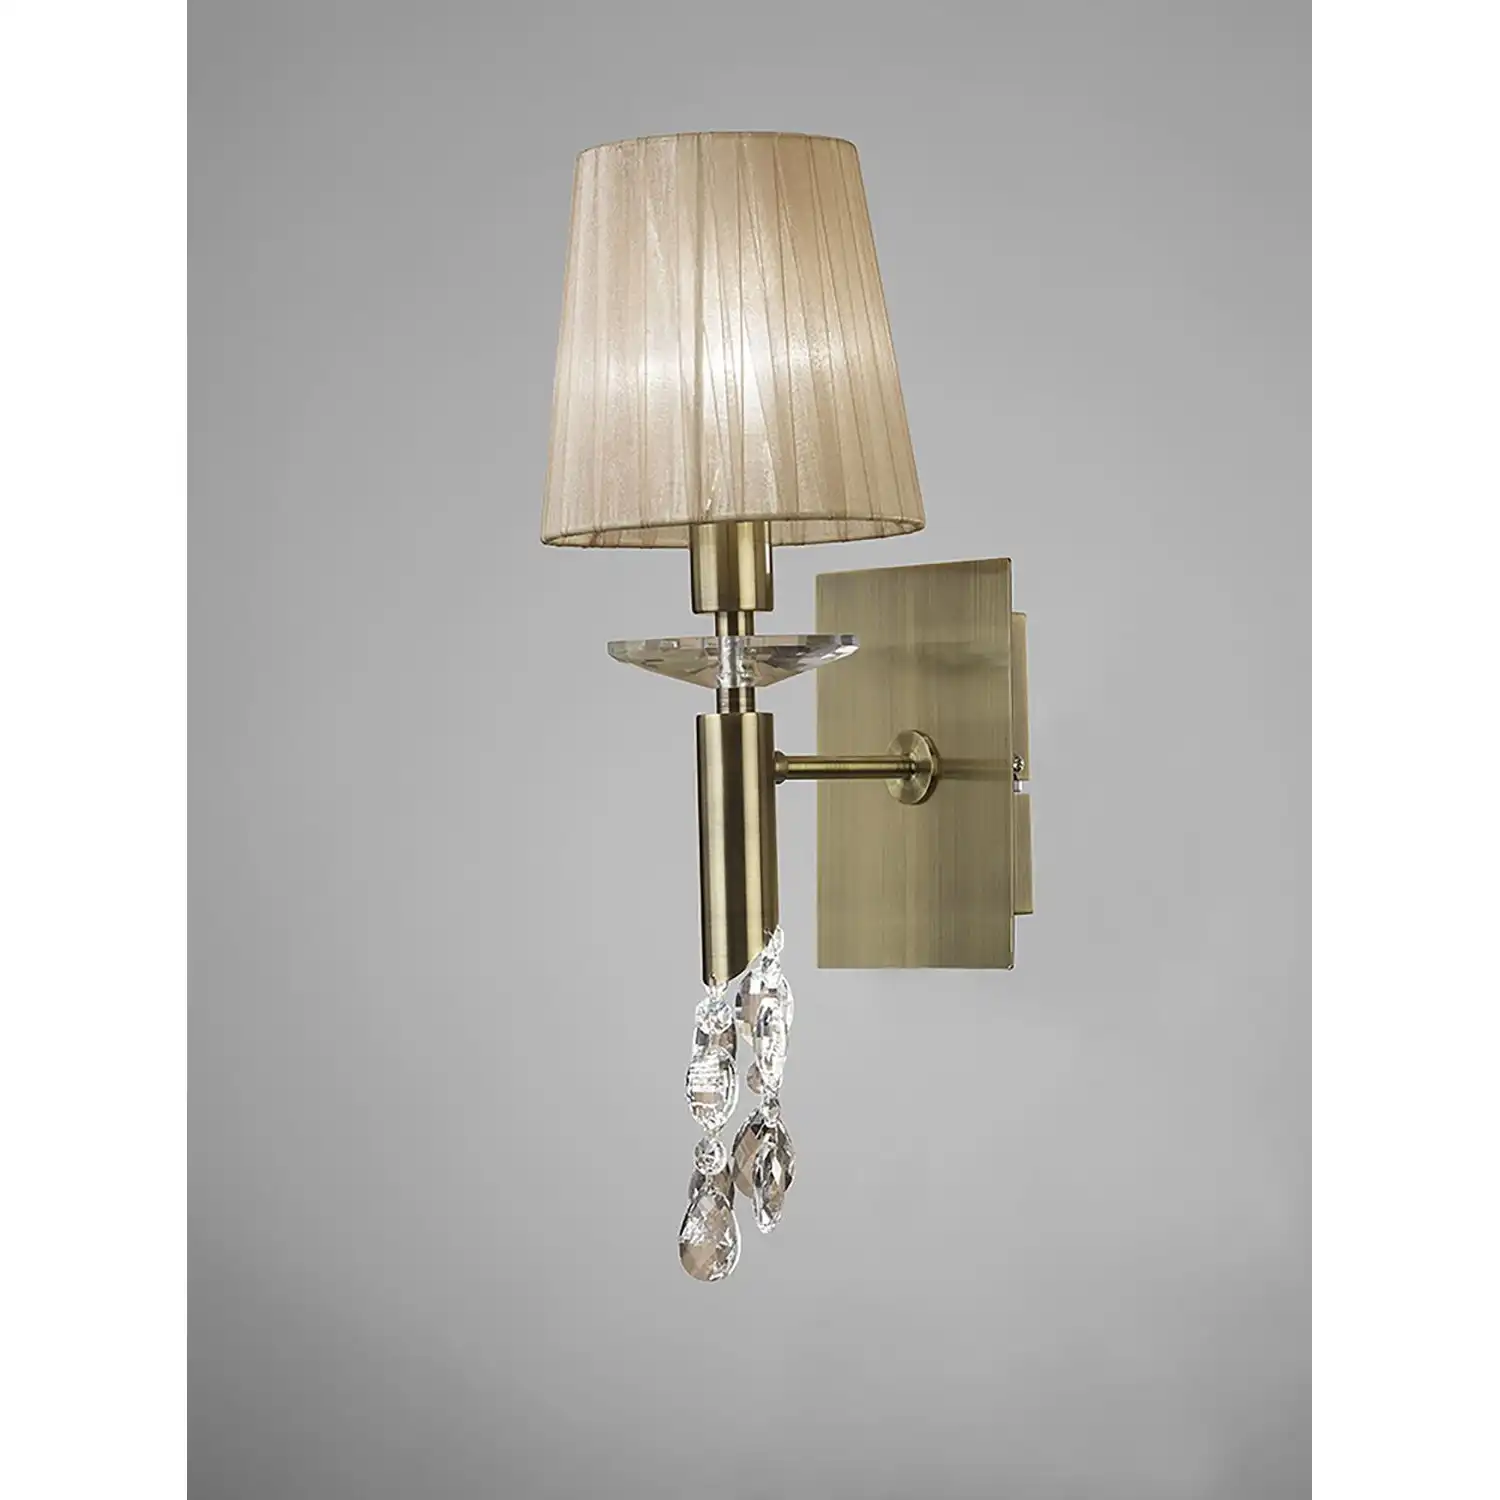 Tiffany Wall Lamp Switched 1+1 Light E14+G9, Antique Brass With Soft Bronze Shade And Clear Crystal